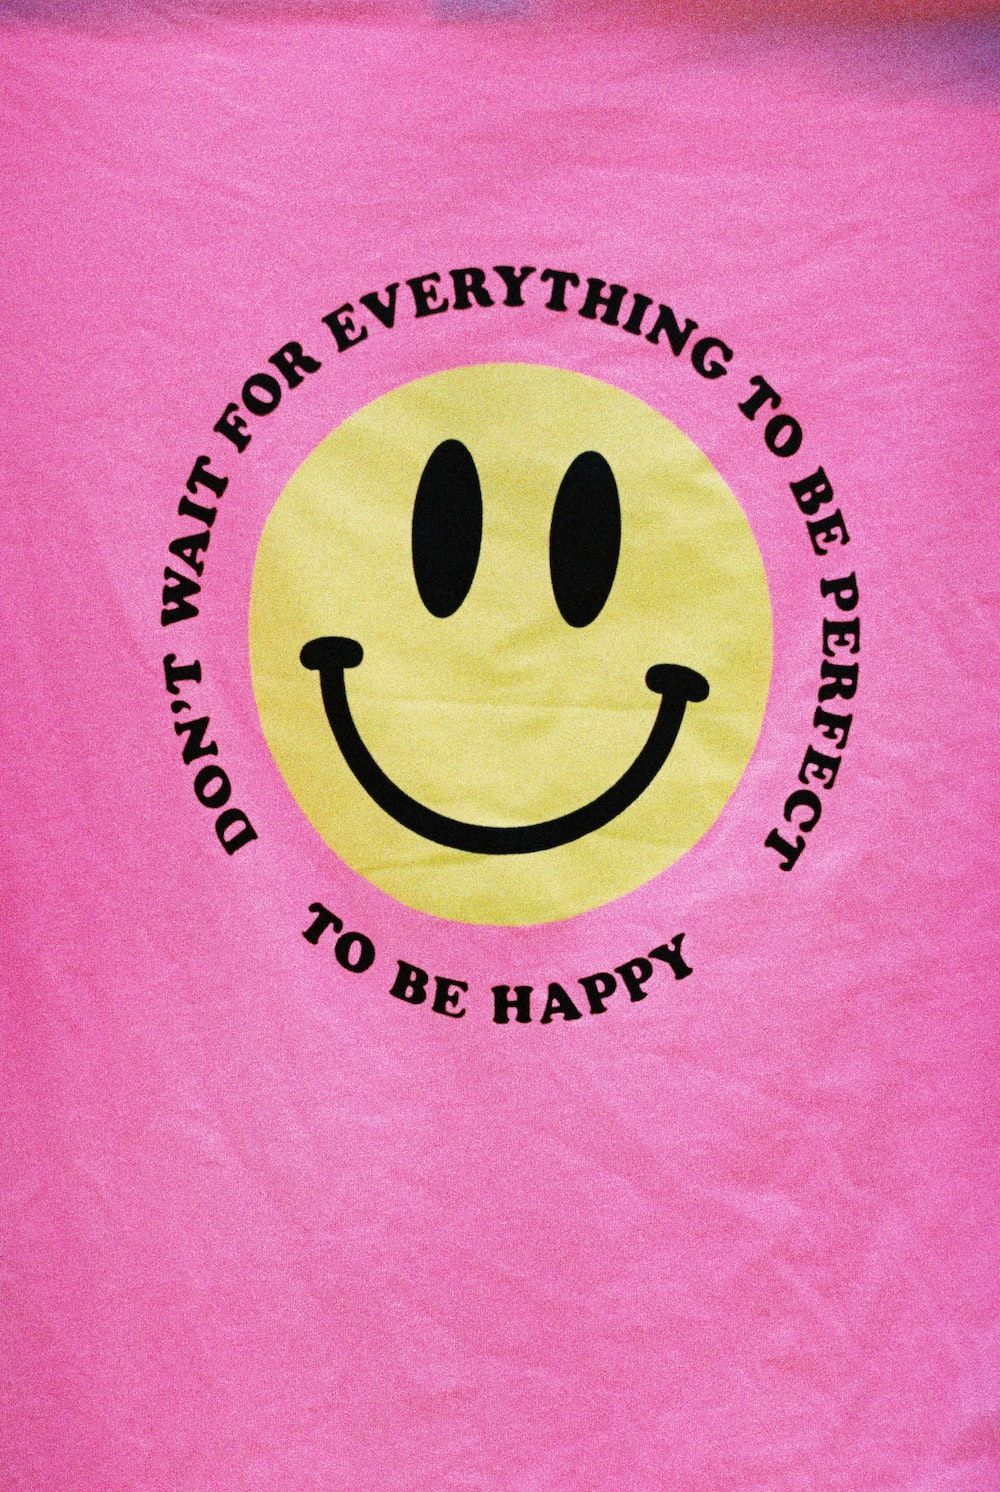 A pink t-shirt with a yellow smiley face on it. - Smiley